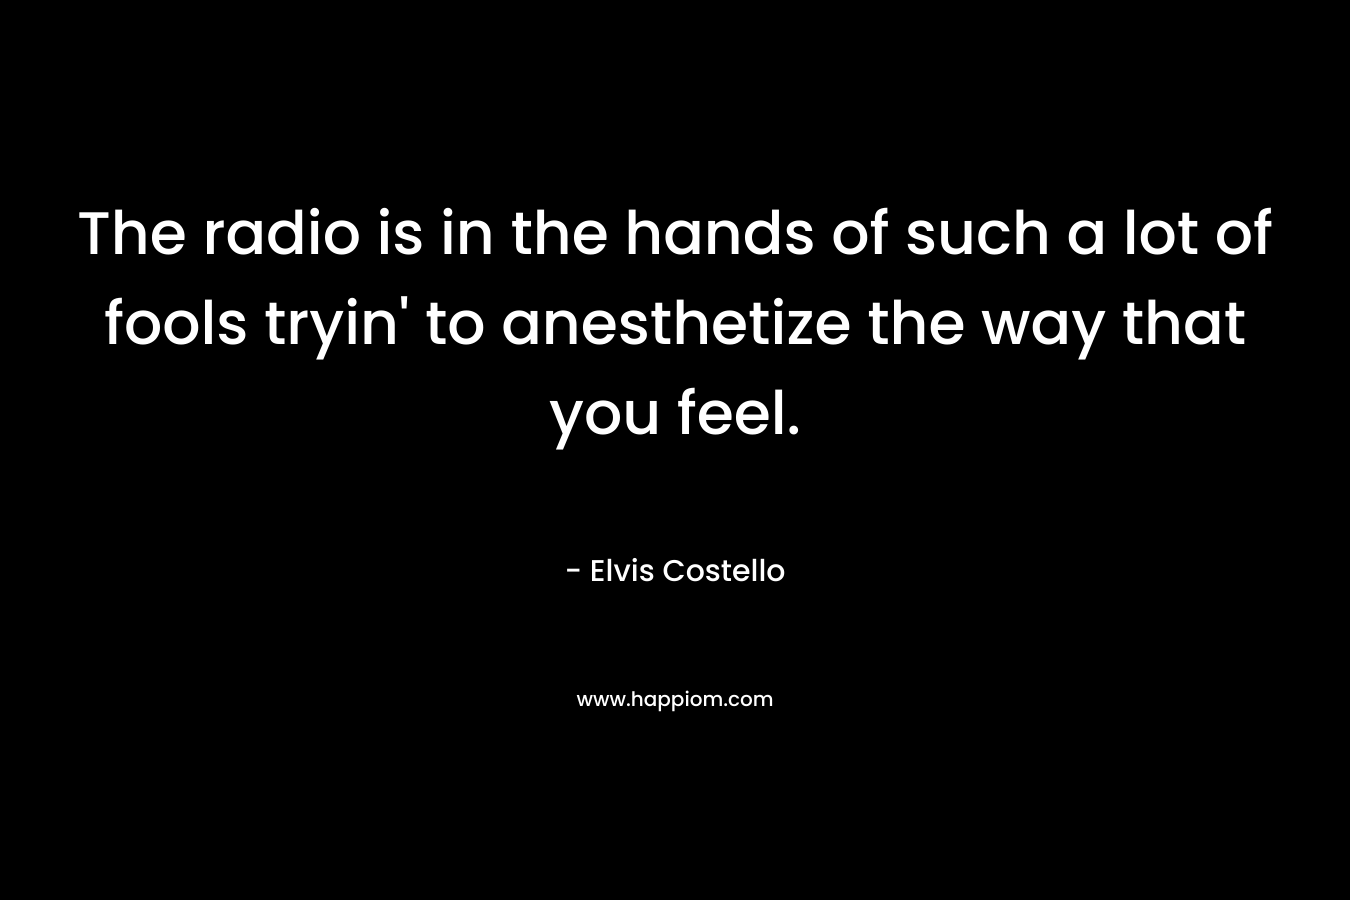 The radio is in the hands of such a lot of fools tryin’ to anesthetize the way that you feel. – Elvis Costello